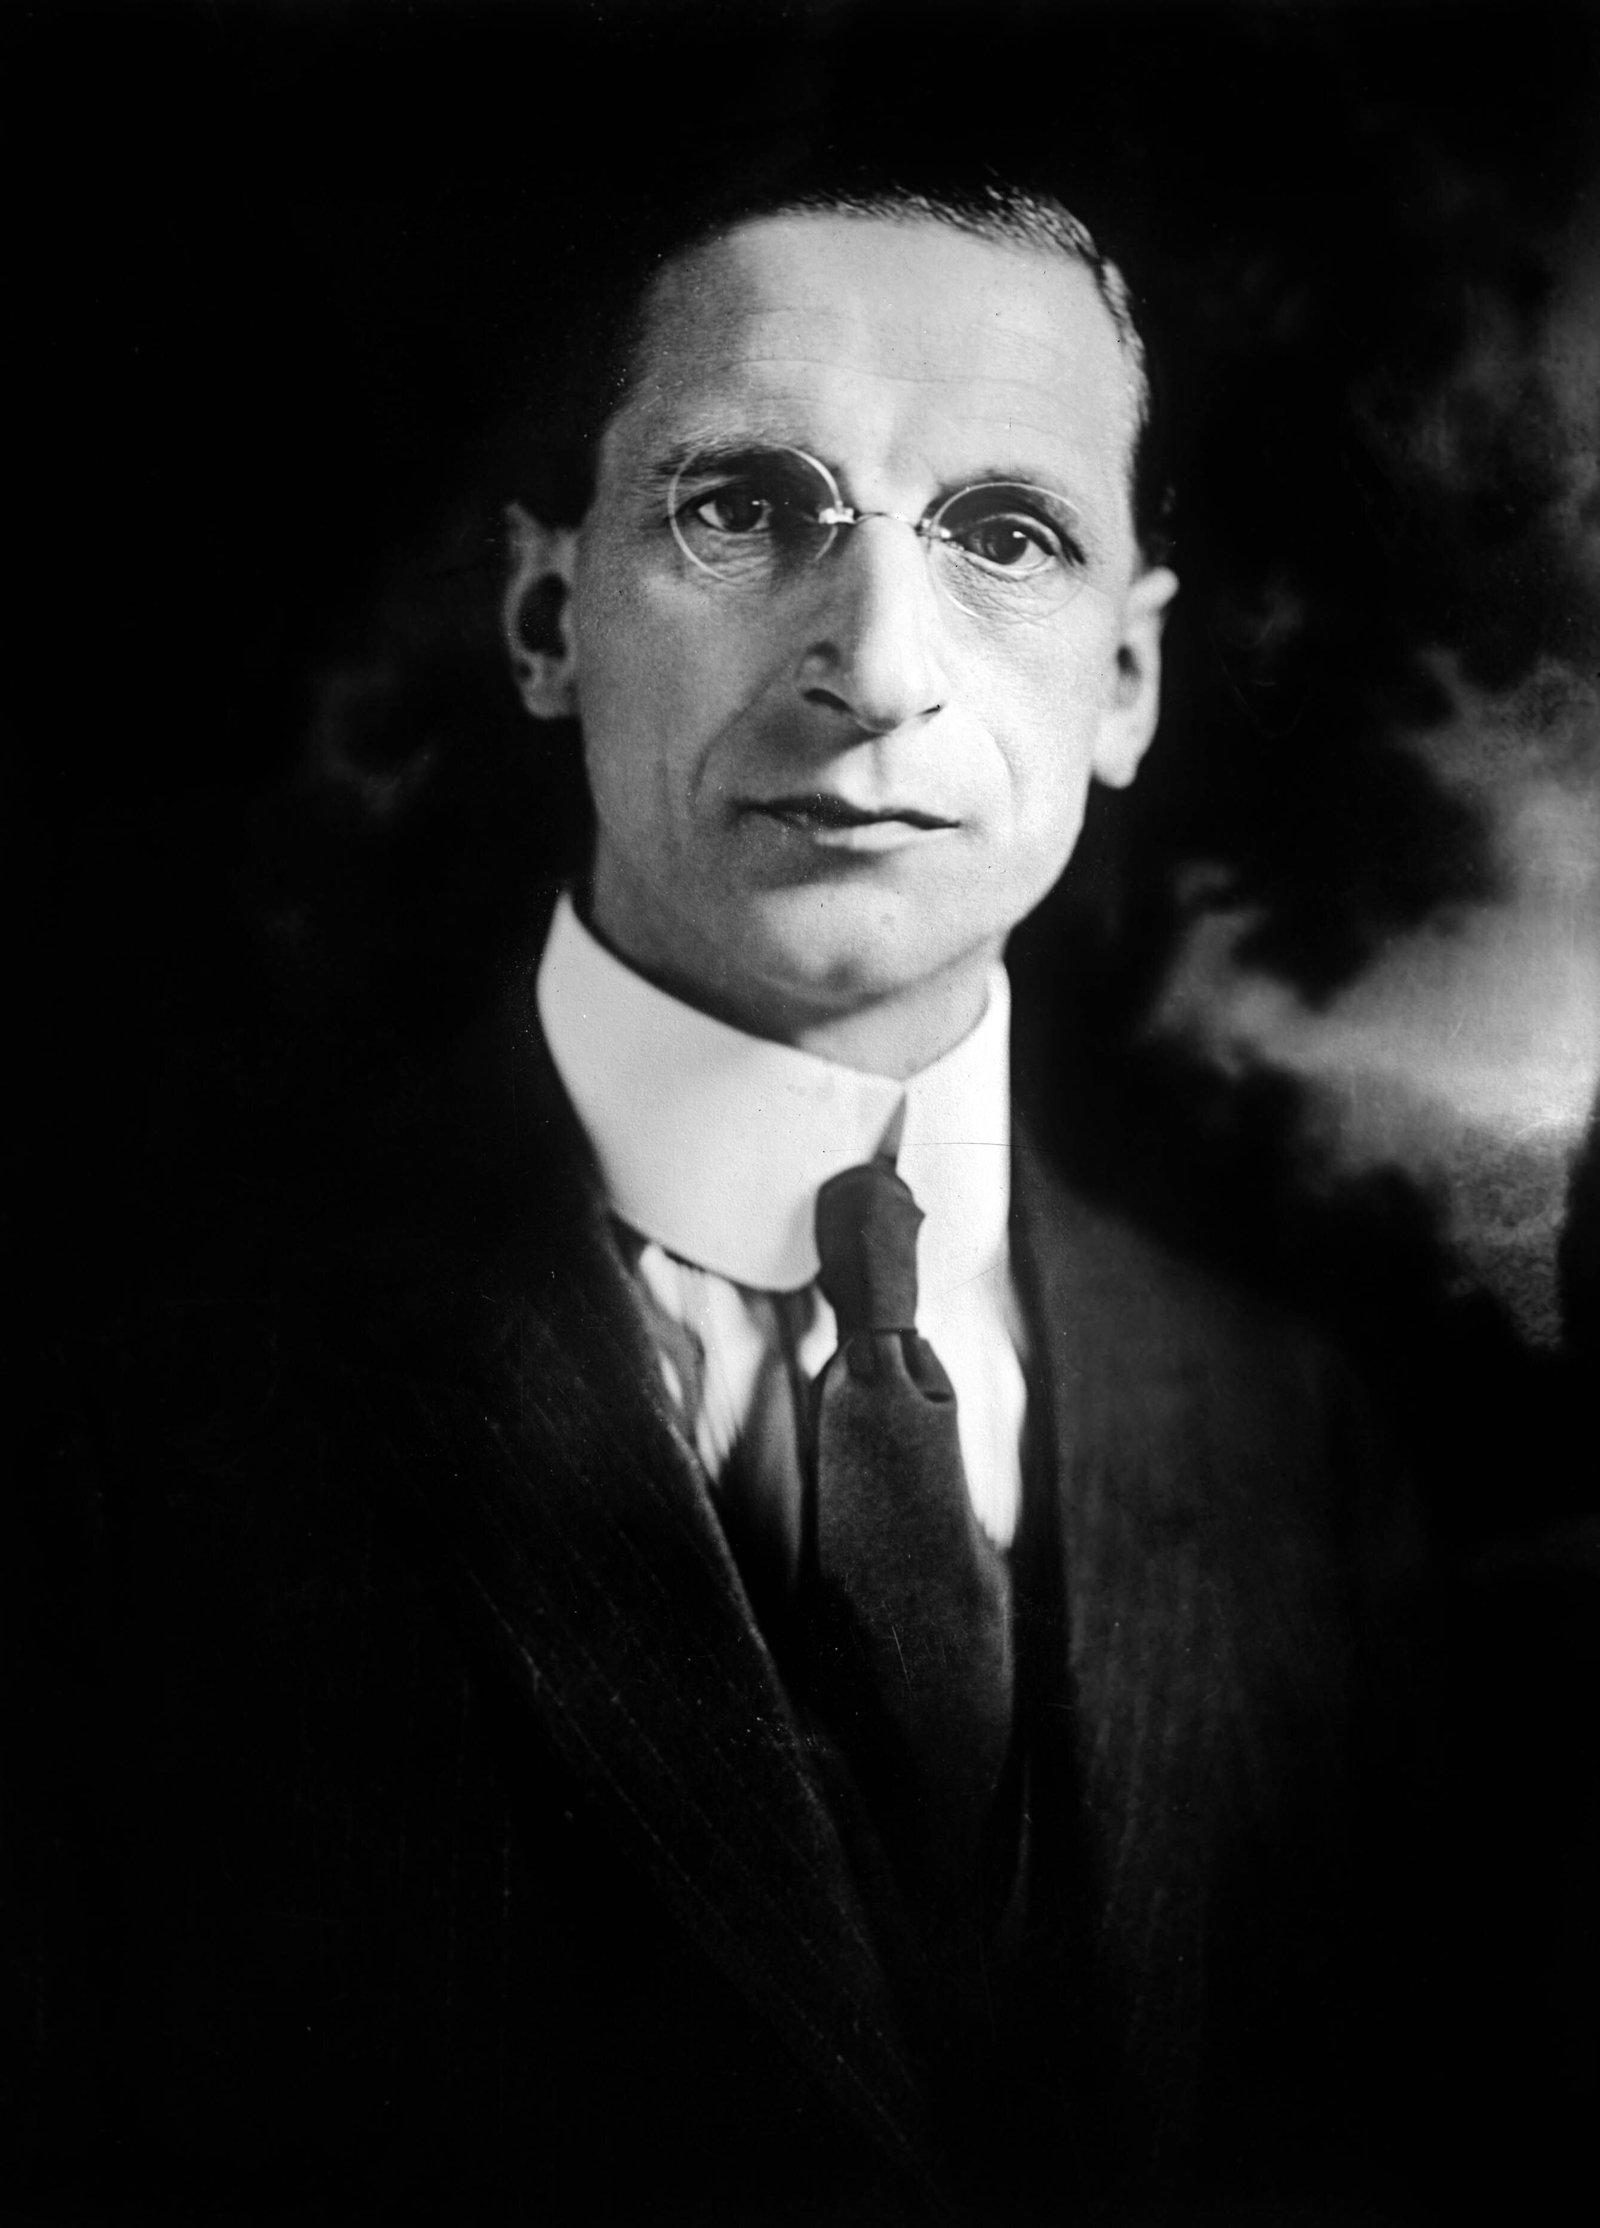 Image - Éamon de Valera. 'My God, it is too bad; there is no hope for it now' (Pic: Getty Images)